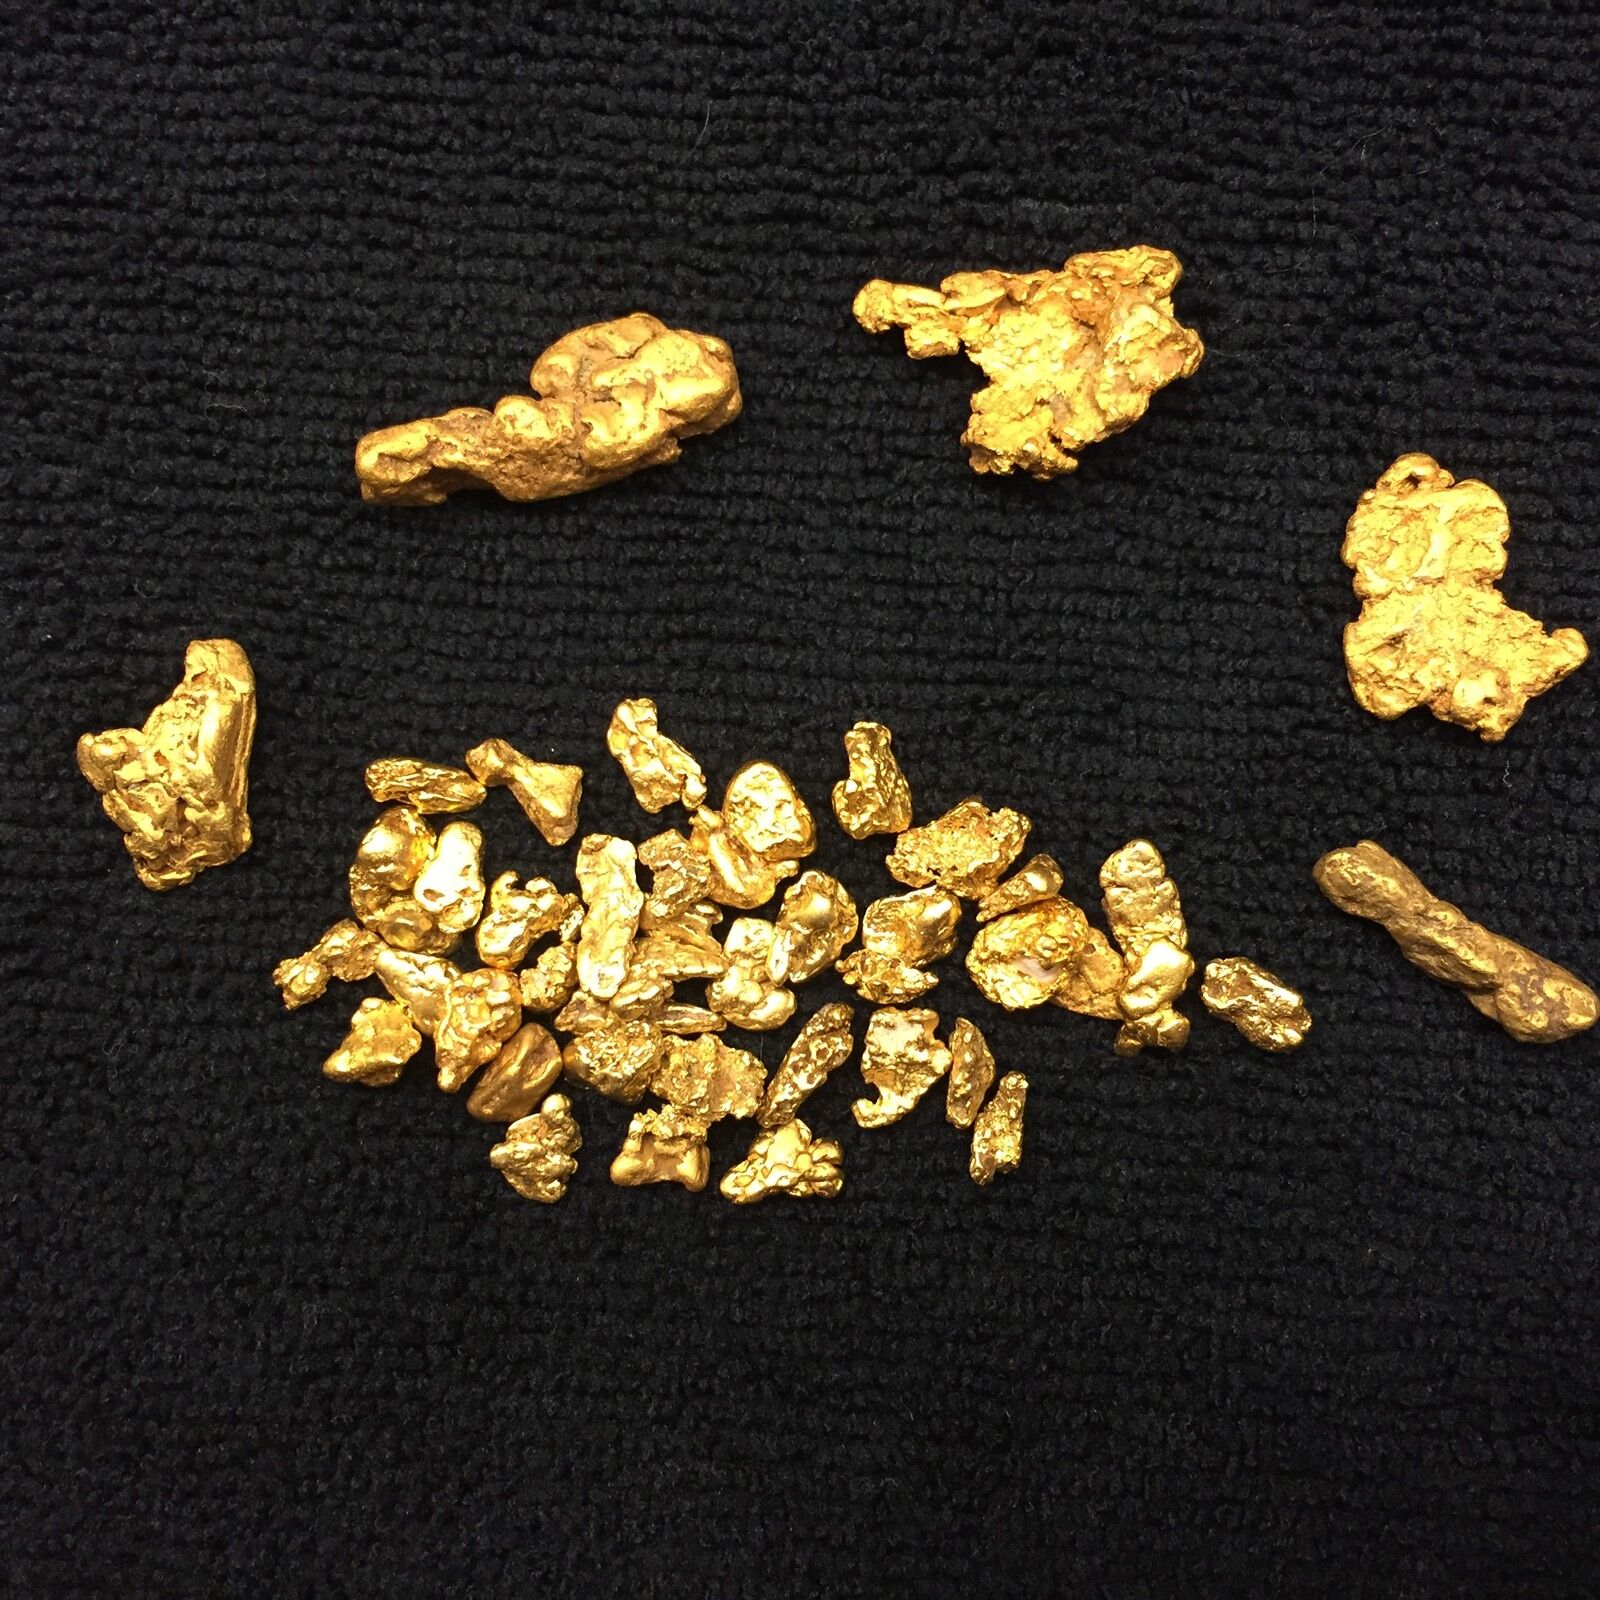 2 1/2 LB NUGGET RESERVE Gold Panning Paydirt Concentrate - CHUNKY GOLD